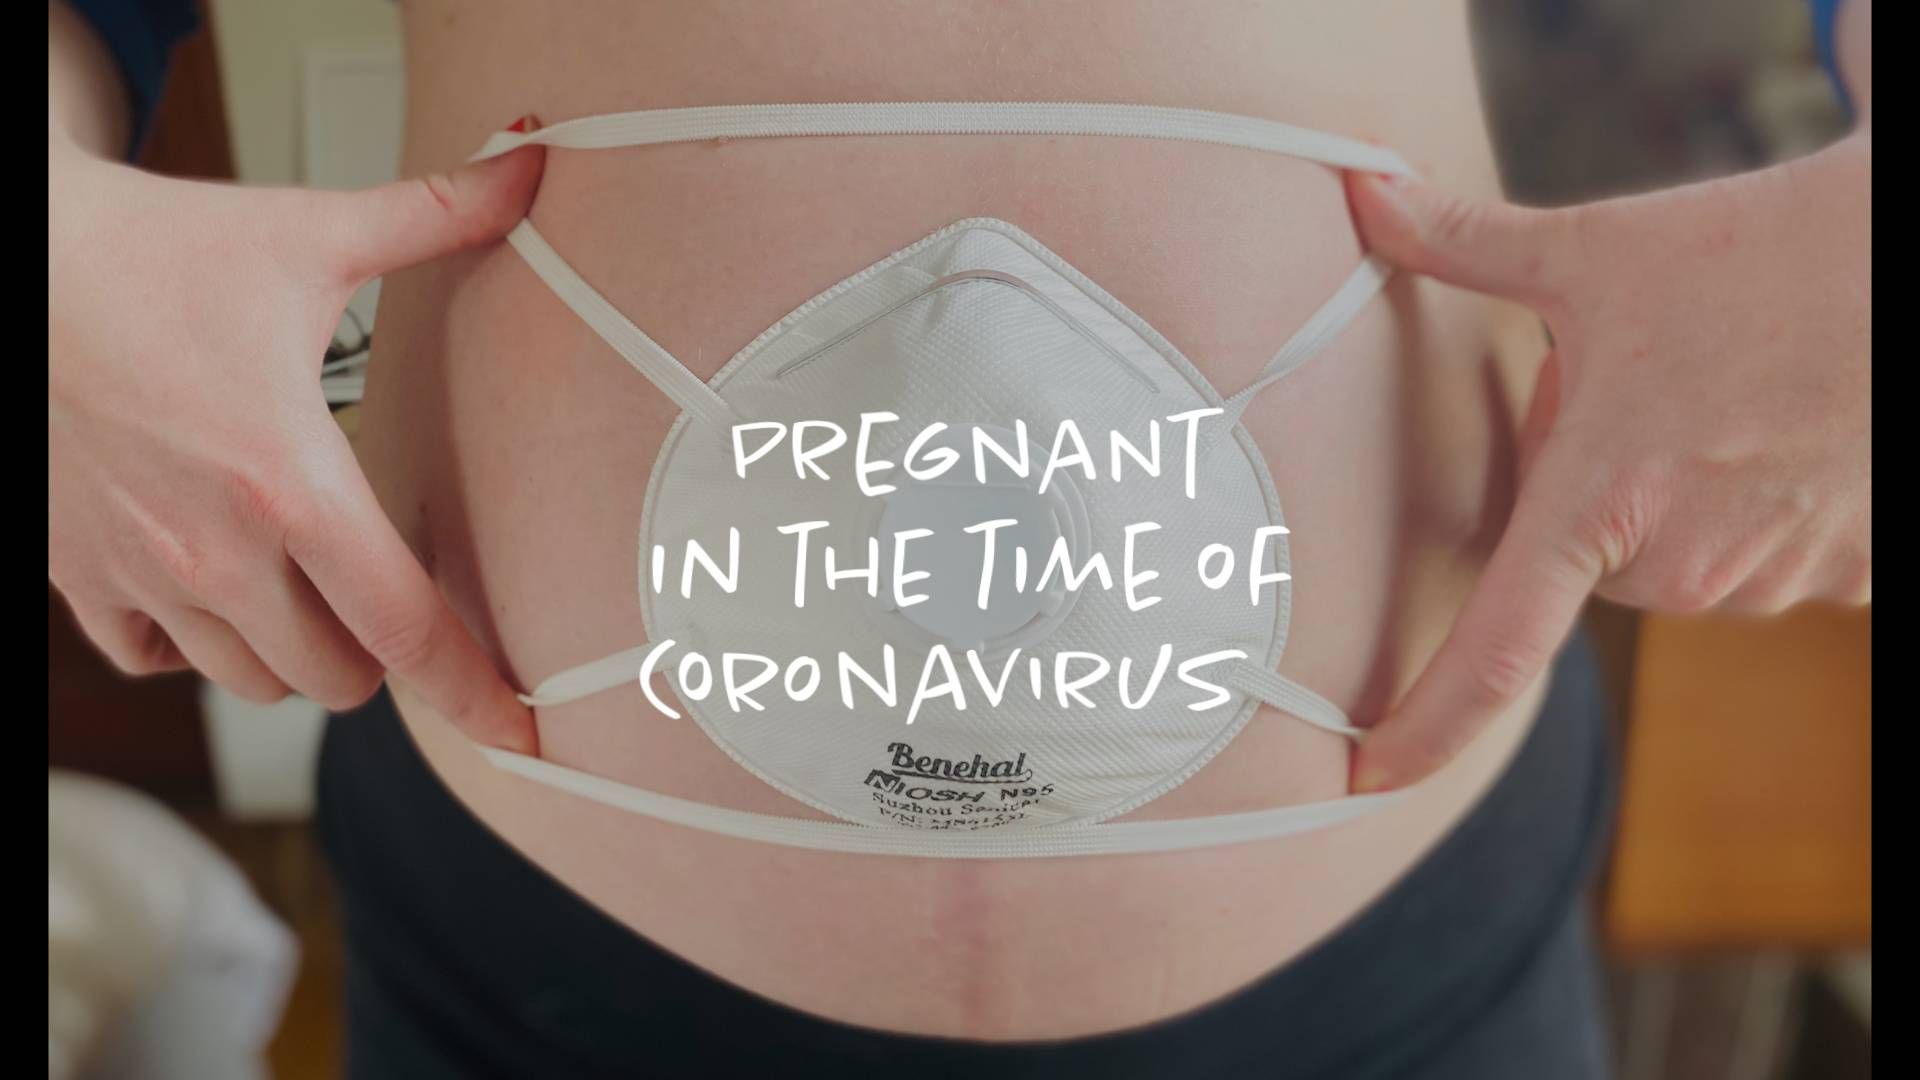 Get a Preview of 'Pregnant in the Time of Coronavirus'